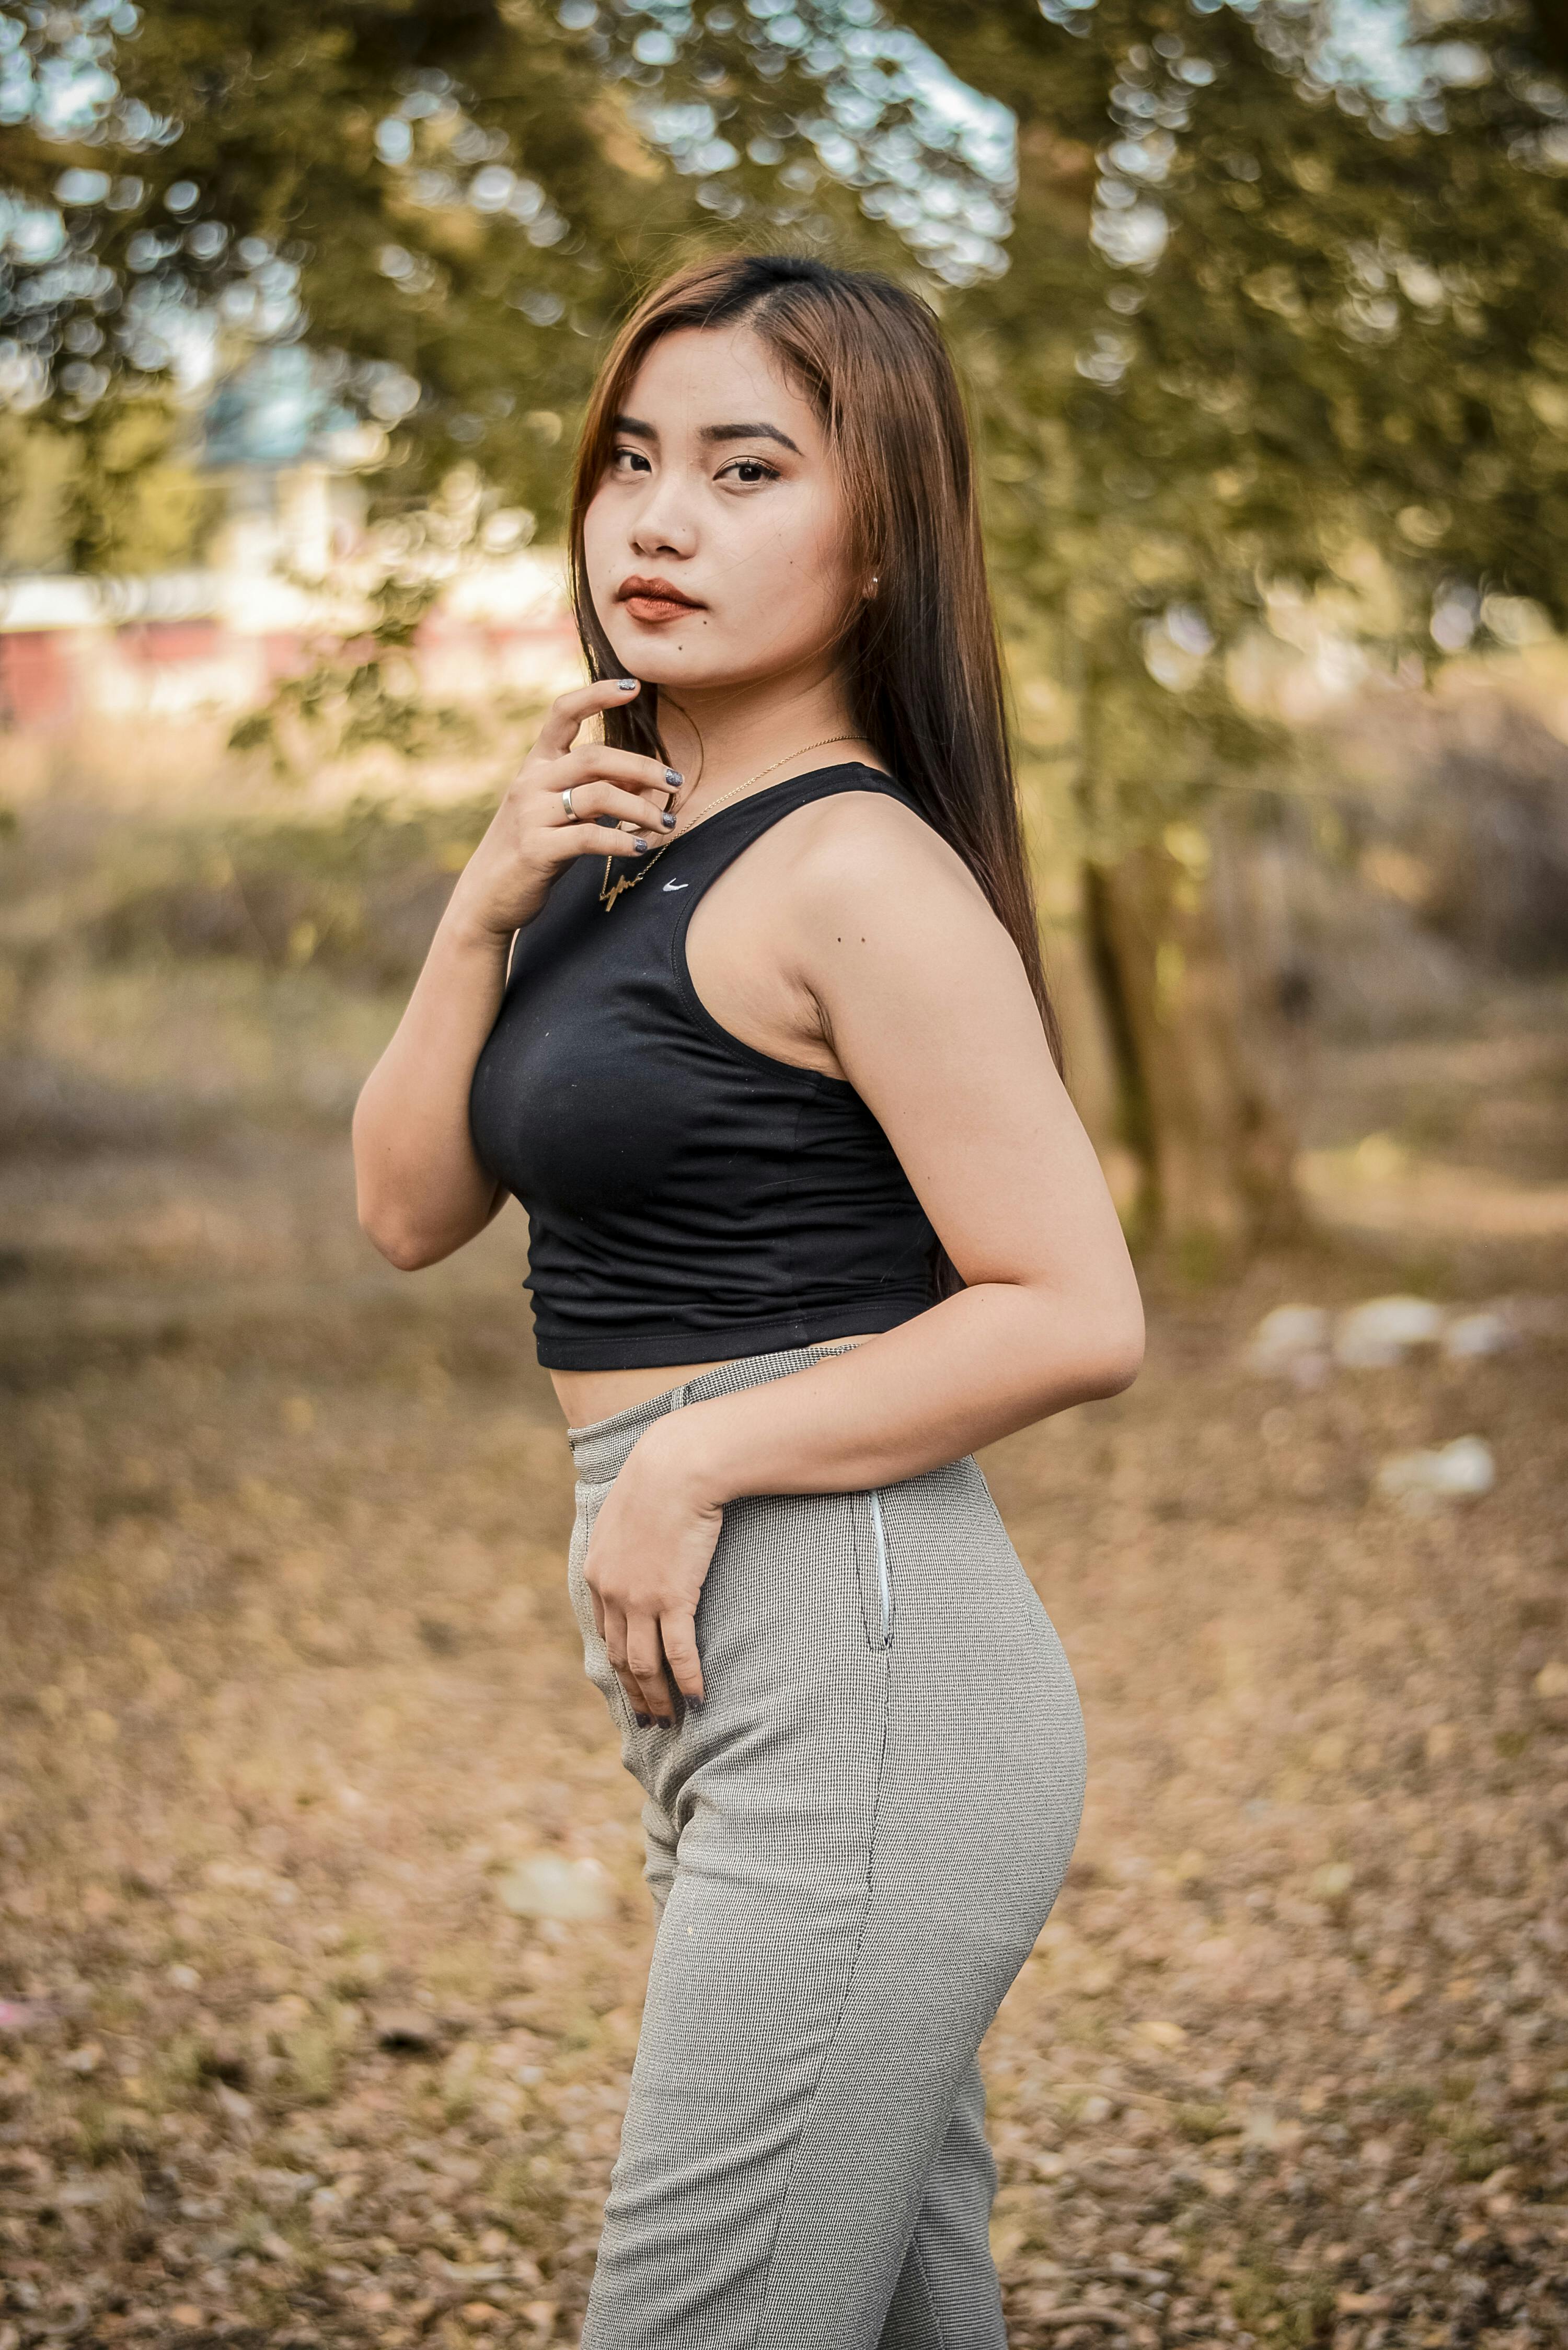 Woman in Black Tank Top and Gray Pants Posing · Free Stock Photo